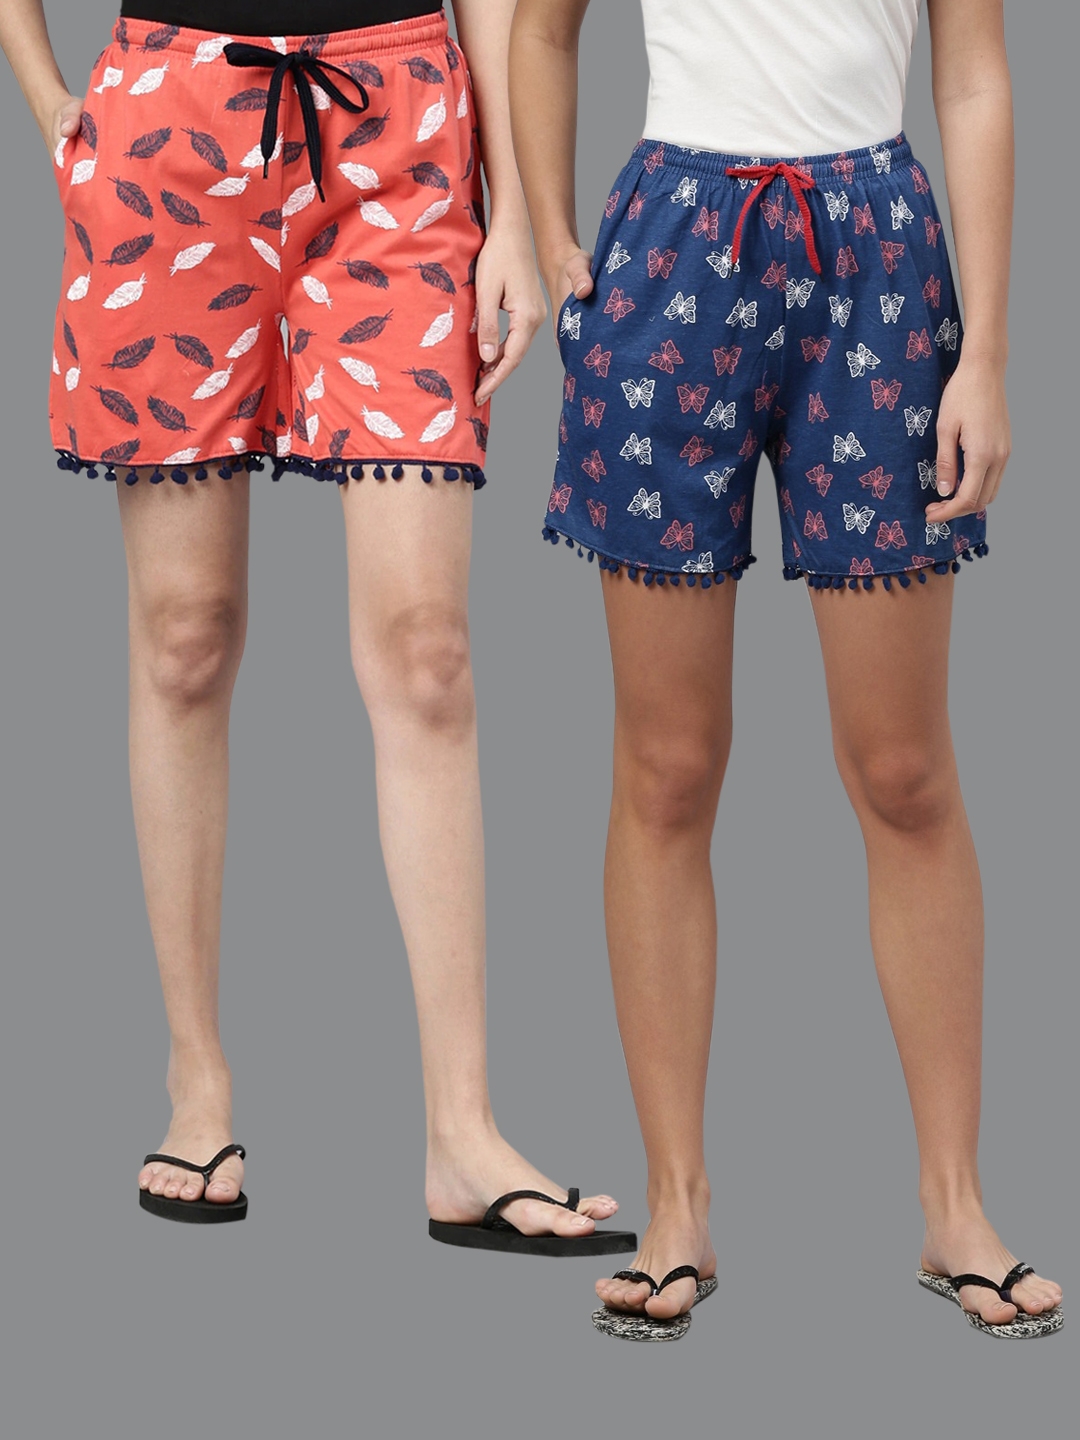 Kryptic | Kryptic Women's 100% Cotton Printed Shorts - Pack of 2